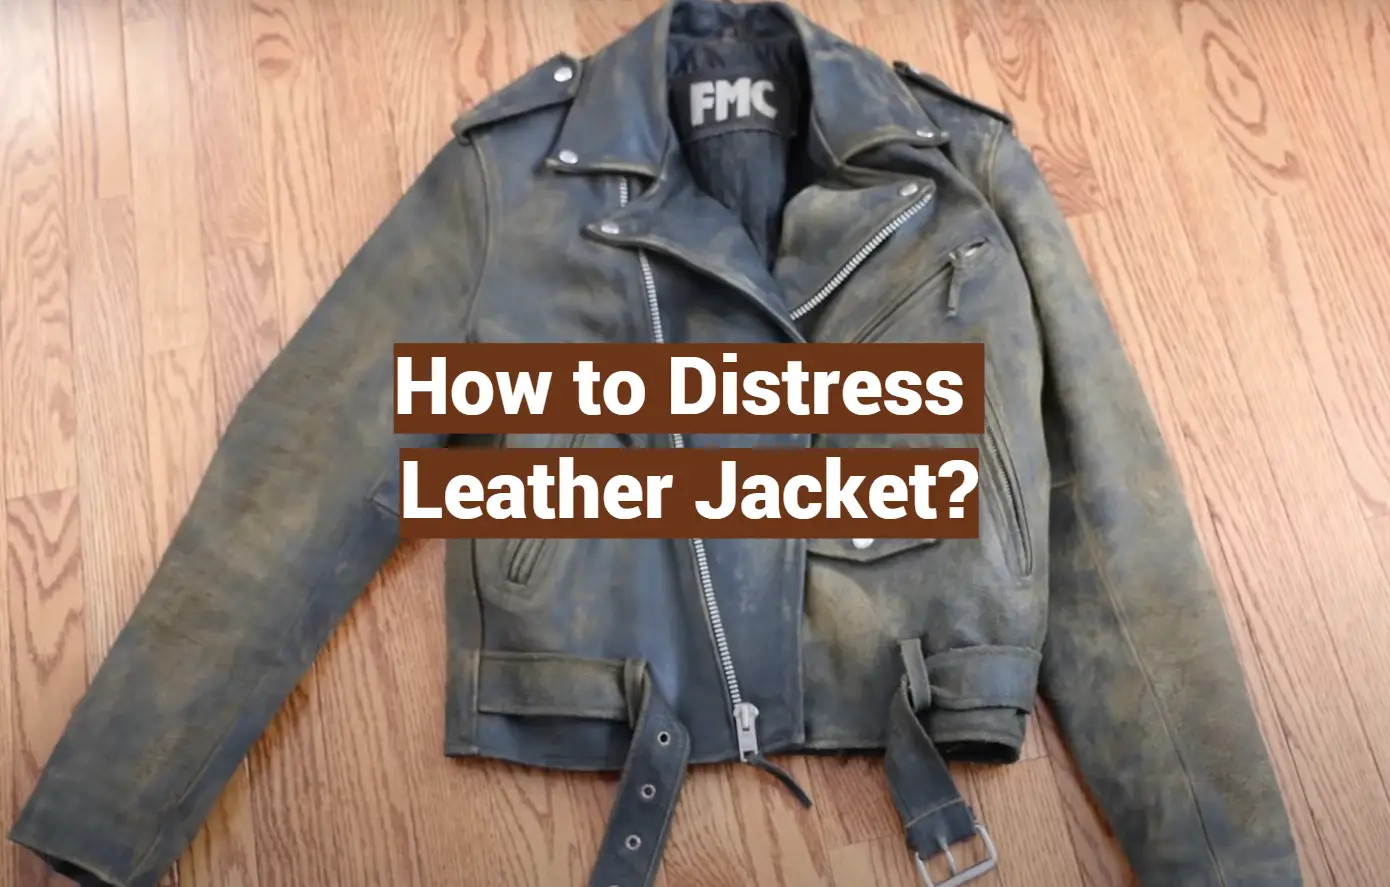 How to Distress Leather Jacket?